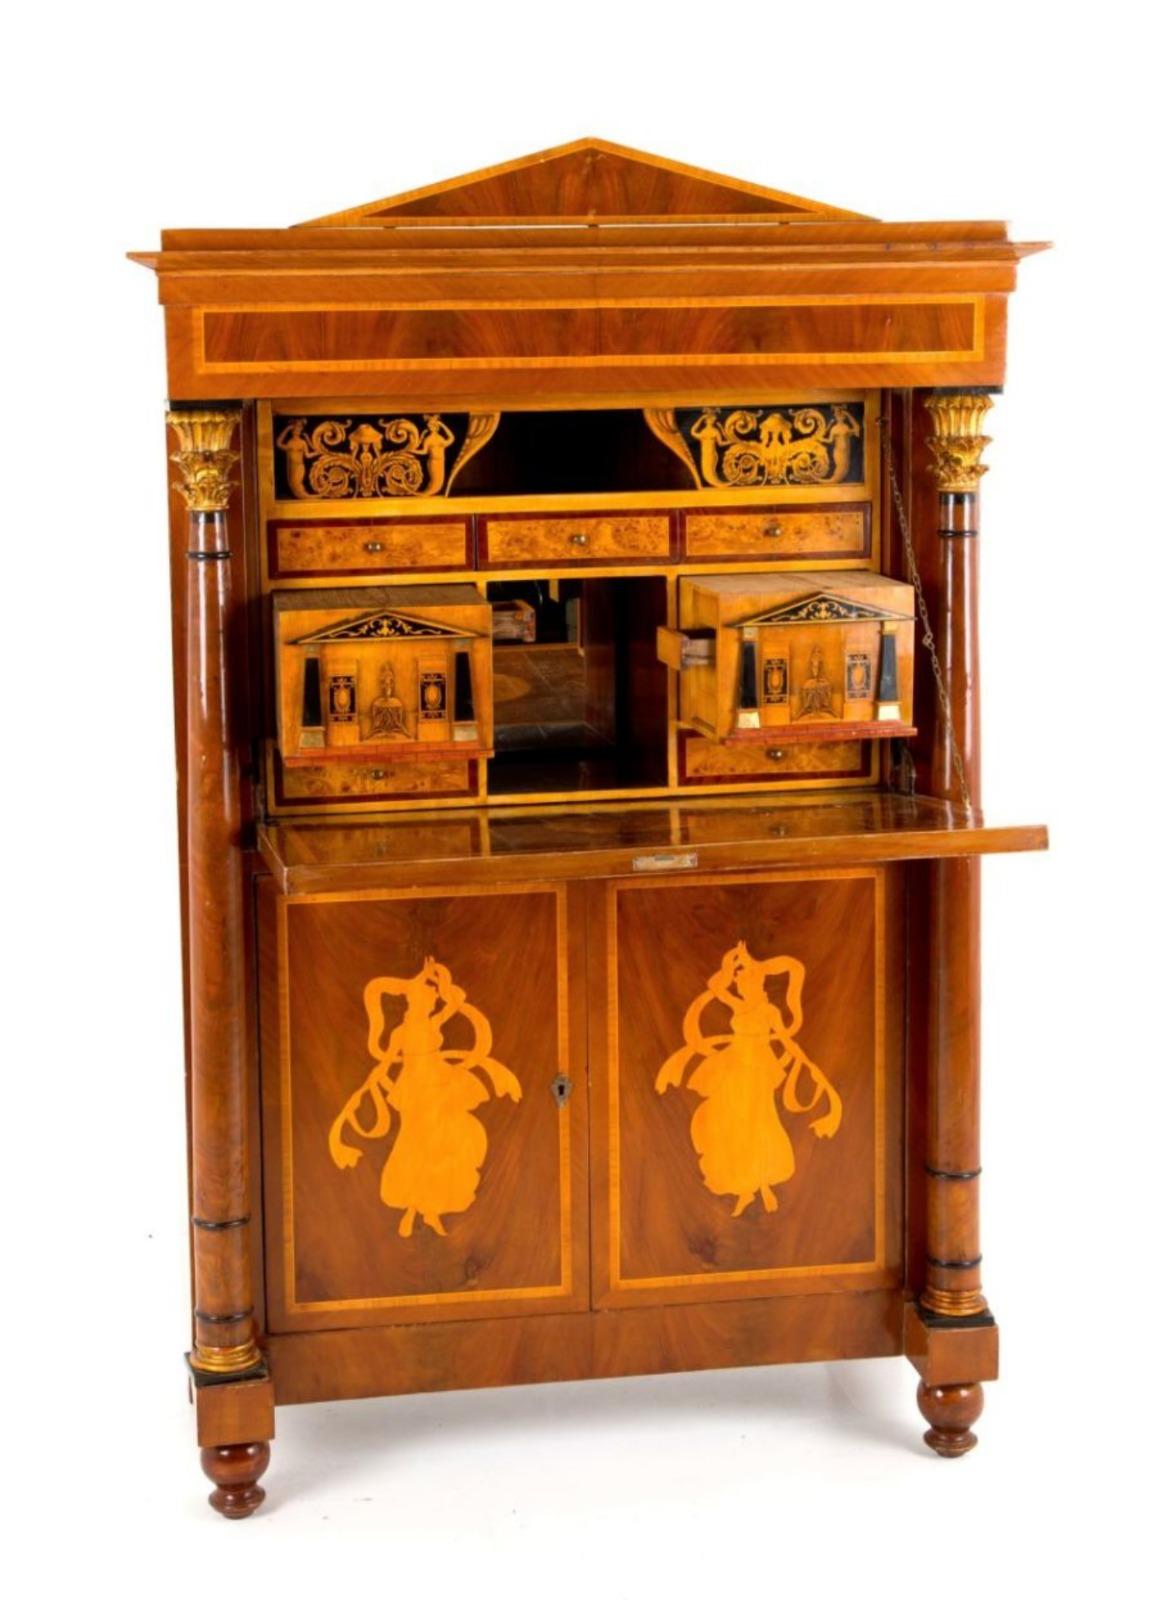 Amazing Secretaire Biedermeier Germany 19th century
155x107x50.5cm
Secretaire inlaid in various woods with columns.
Biedermeier period
perfect condition for the age.